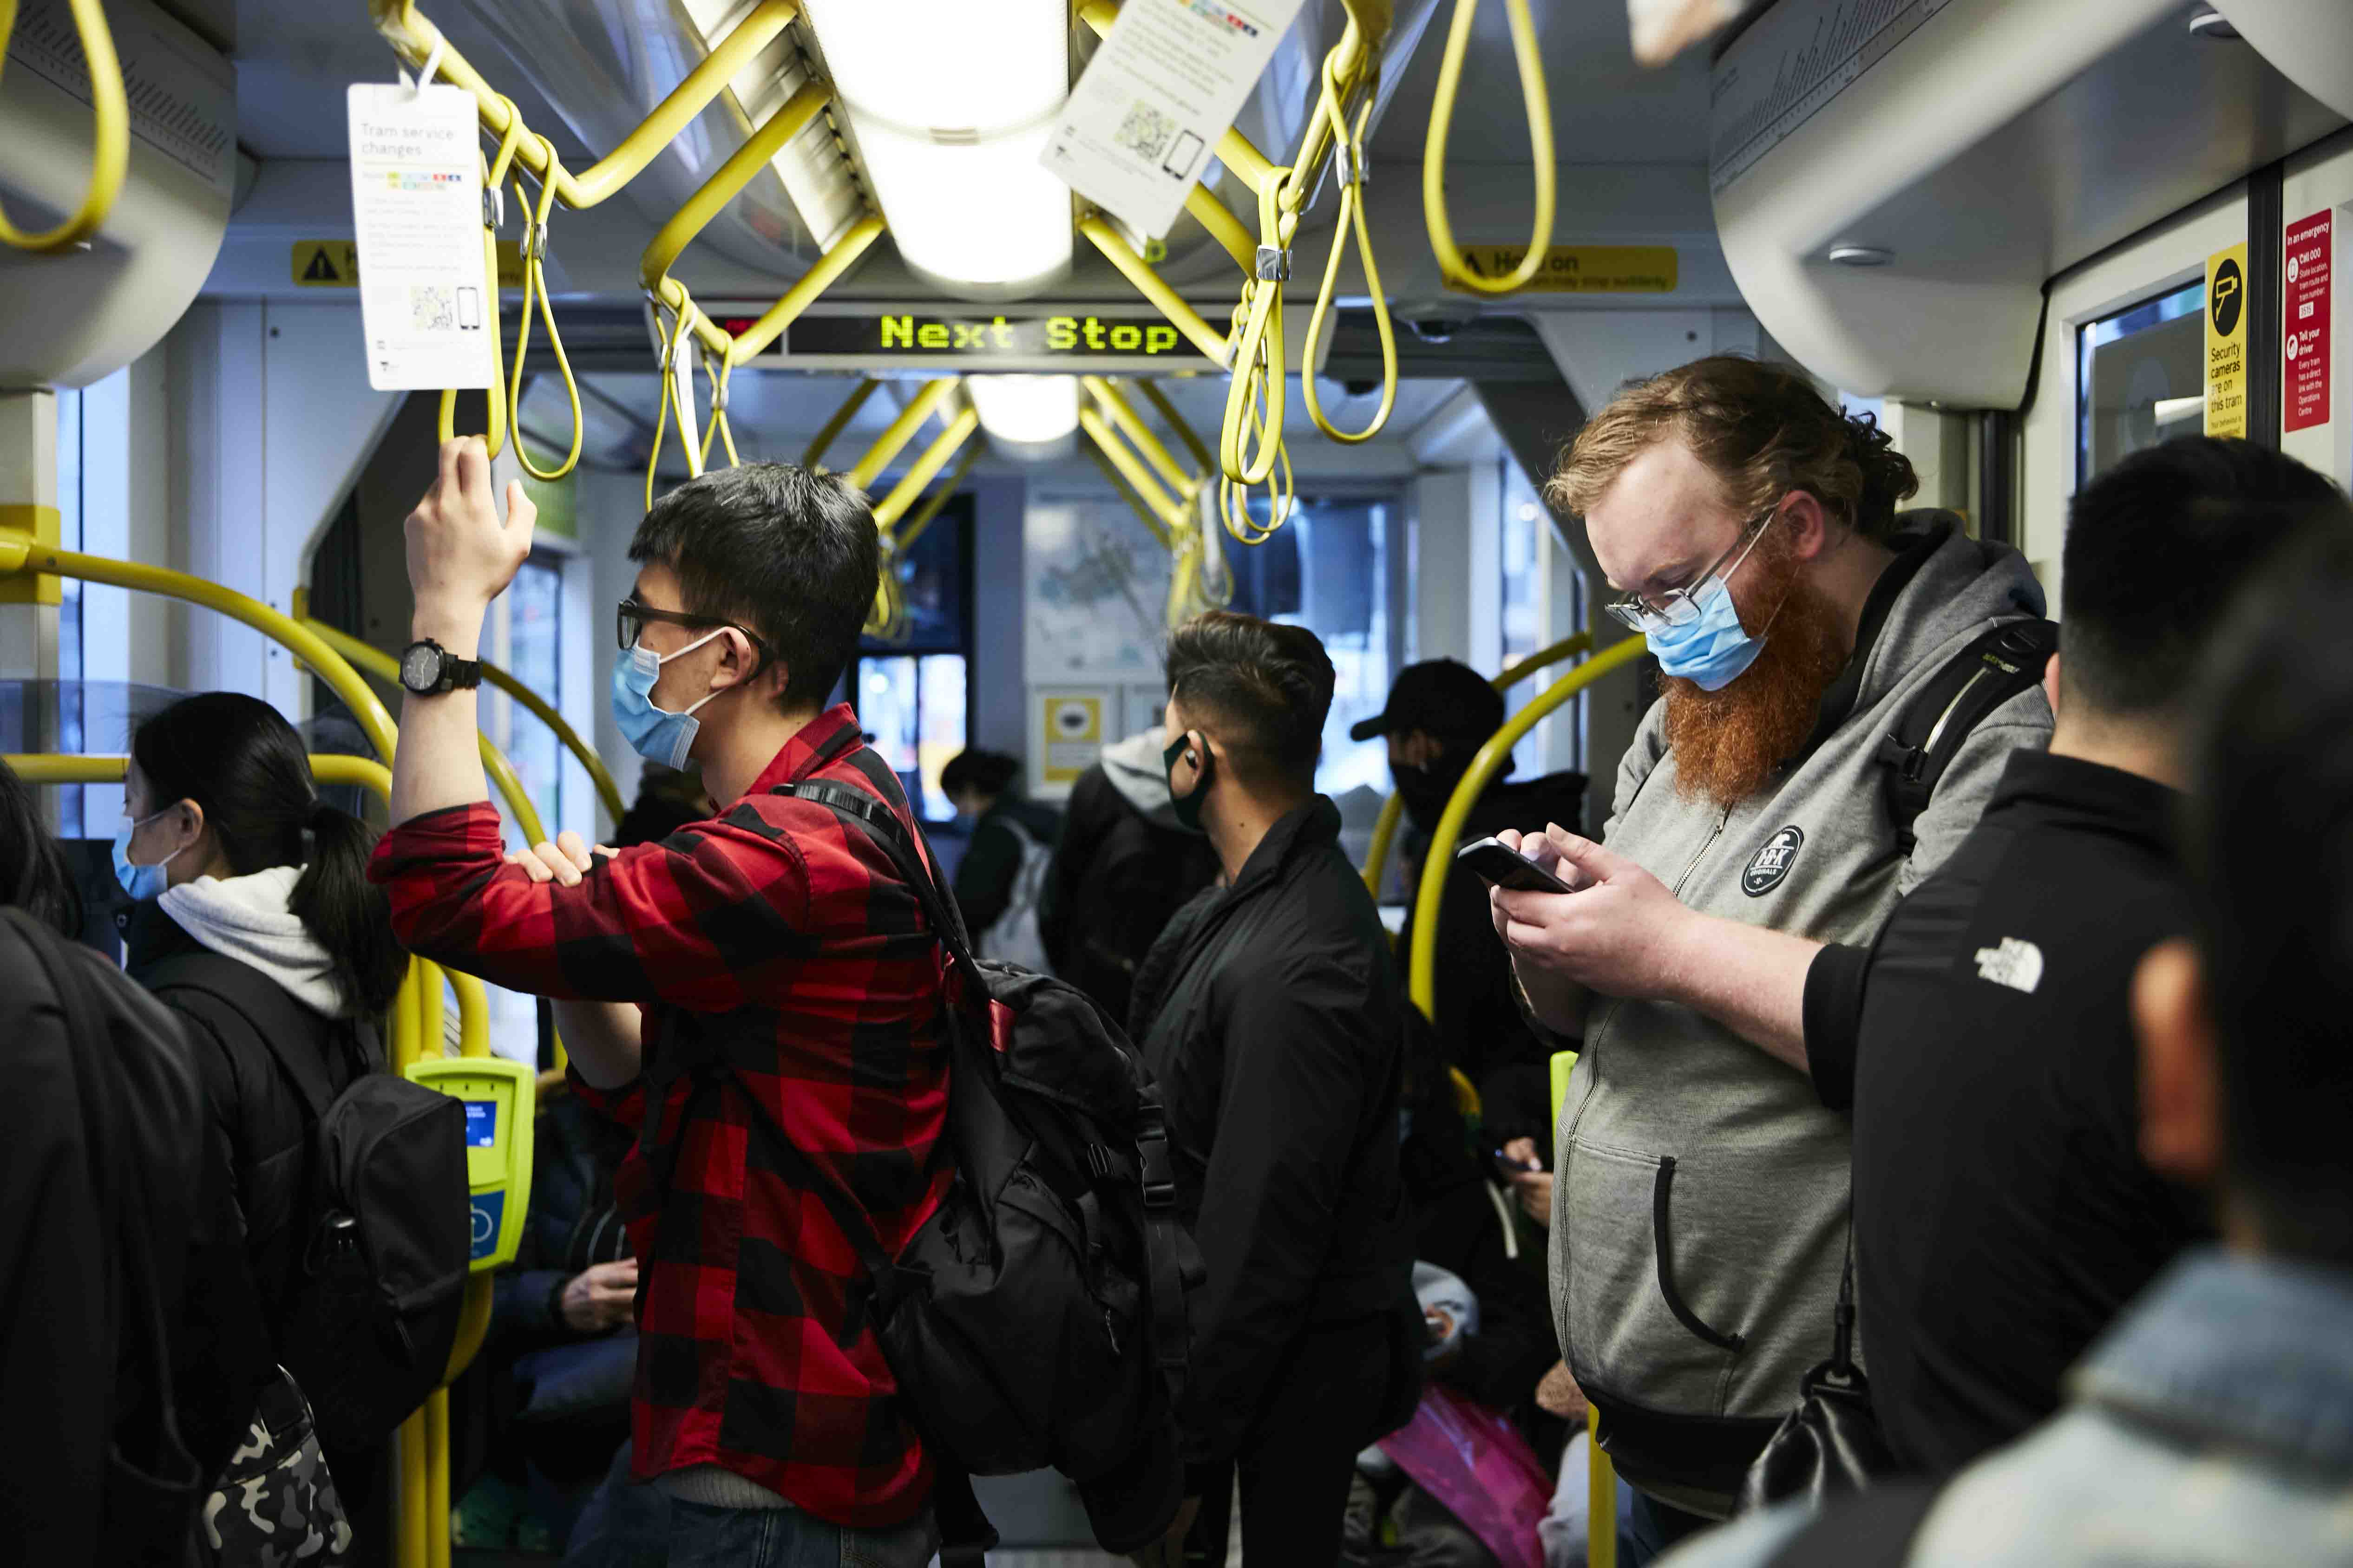 Image is a landscape orientation colour photograph showing passengers travelling on a tram. A person in a red and black checkered shirt stands to the left of the image holding onto a yellow hanging strap. They have short black hair and are wearing dark-framed glasses. A person standing to the right of the image has a red beard and medium-length red hair. They are wearing glasses and a grey hoodie and are looking down at the mobile phone in their hands. Several other people can be seen in the image – their backs to the camera. All of the passengers are wearing facemasks as they travel during the COVID-19 pandemic.